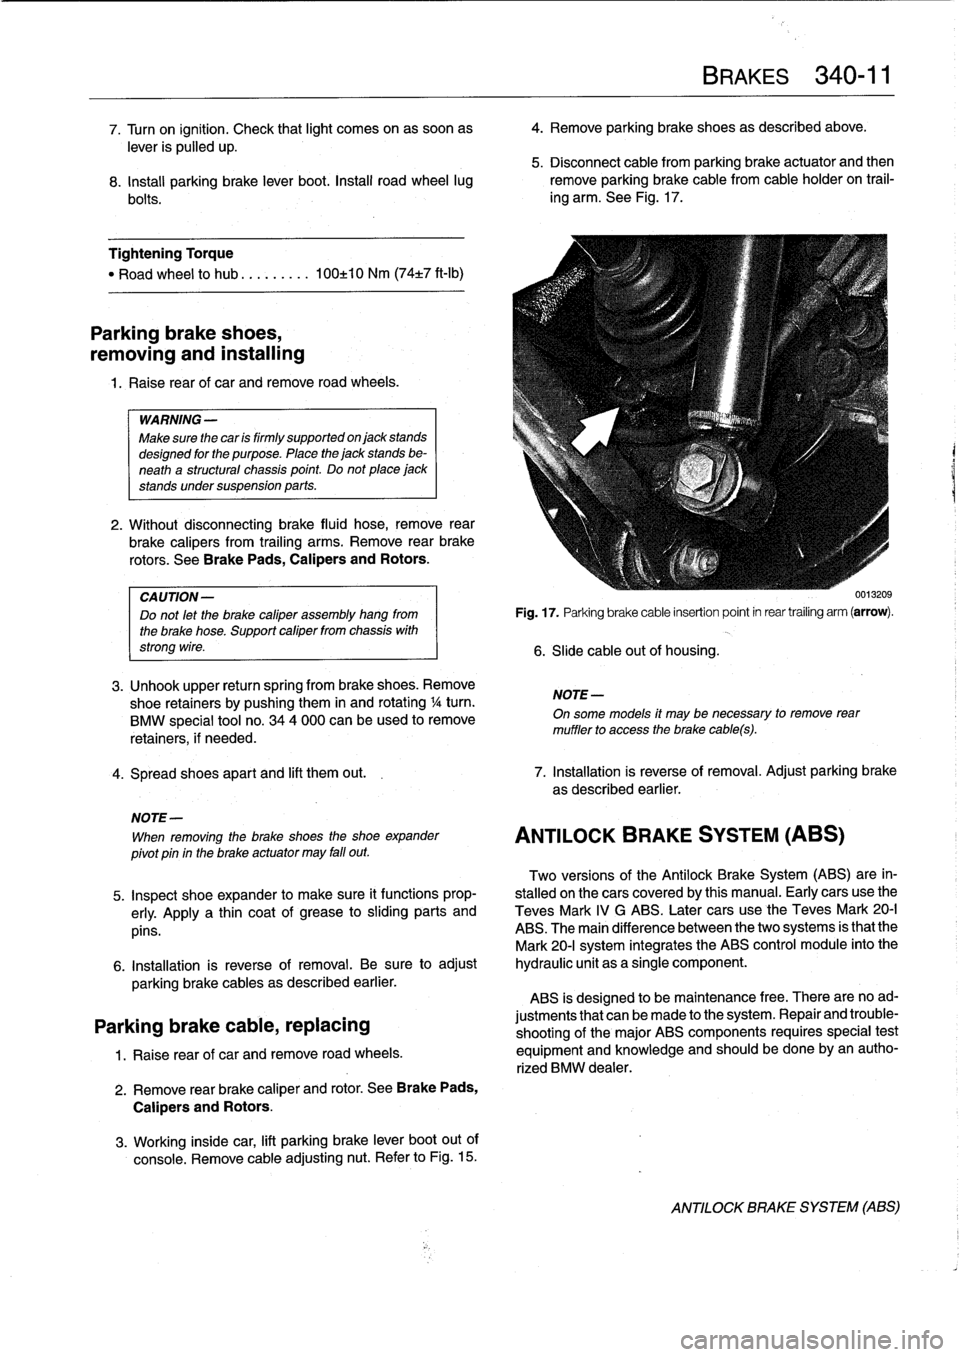 BMW 323i 1997 E36 Service Manual 
7
.
Turn
on
ignition
.
Check
that
light
comes
on
as
soonas

	

4
.
Remove
parkíng
brake
shoes
as
described
above
.

lever
is
pulled
up
.
5
.
Disconnect
cable
from
parking
brake
actuator
and
then

8
